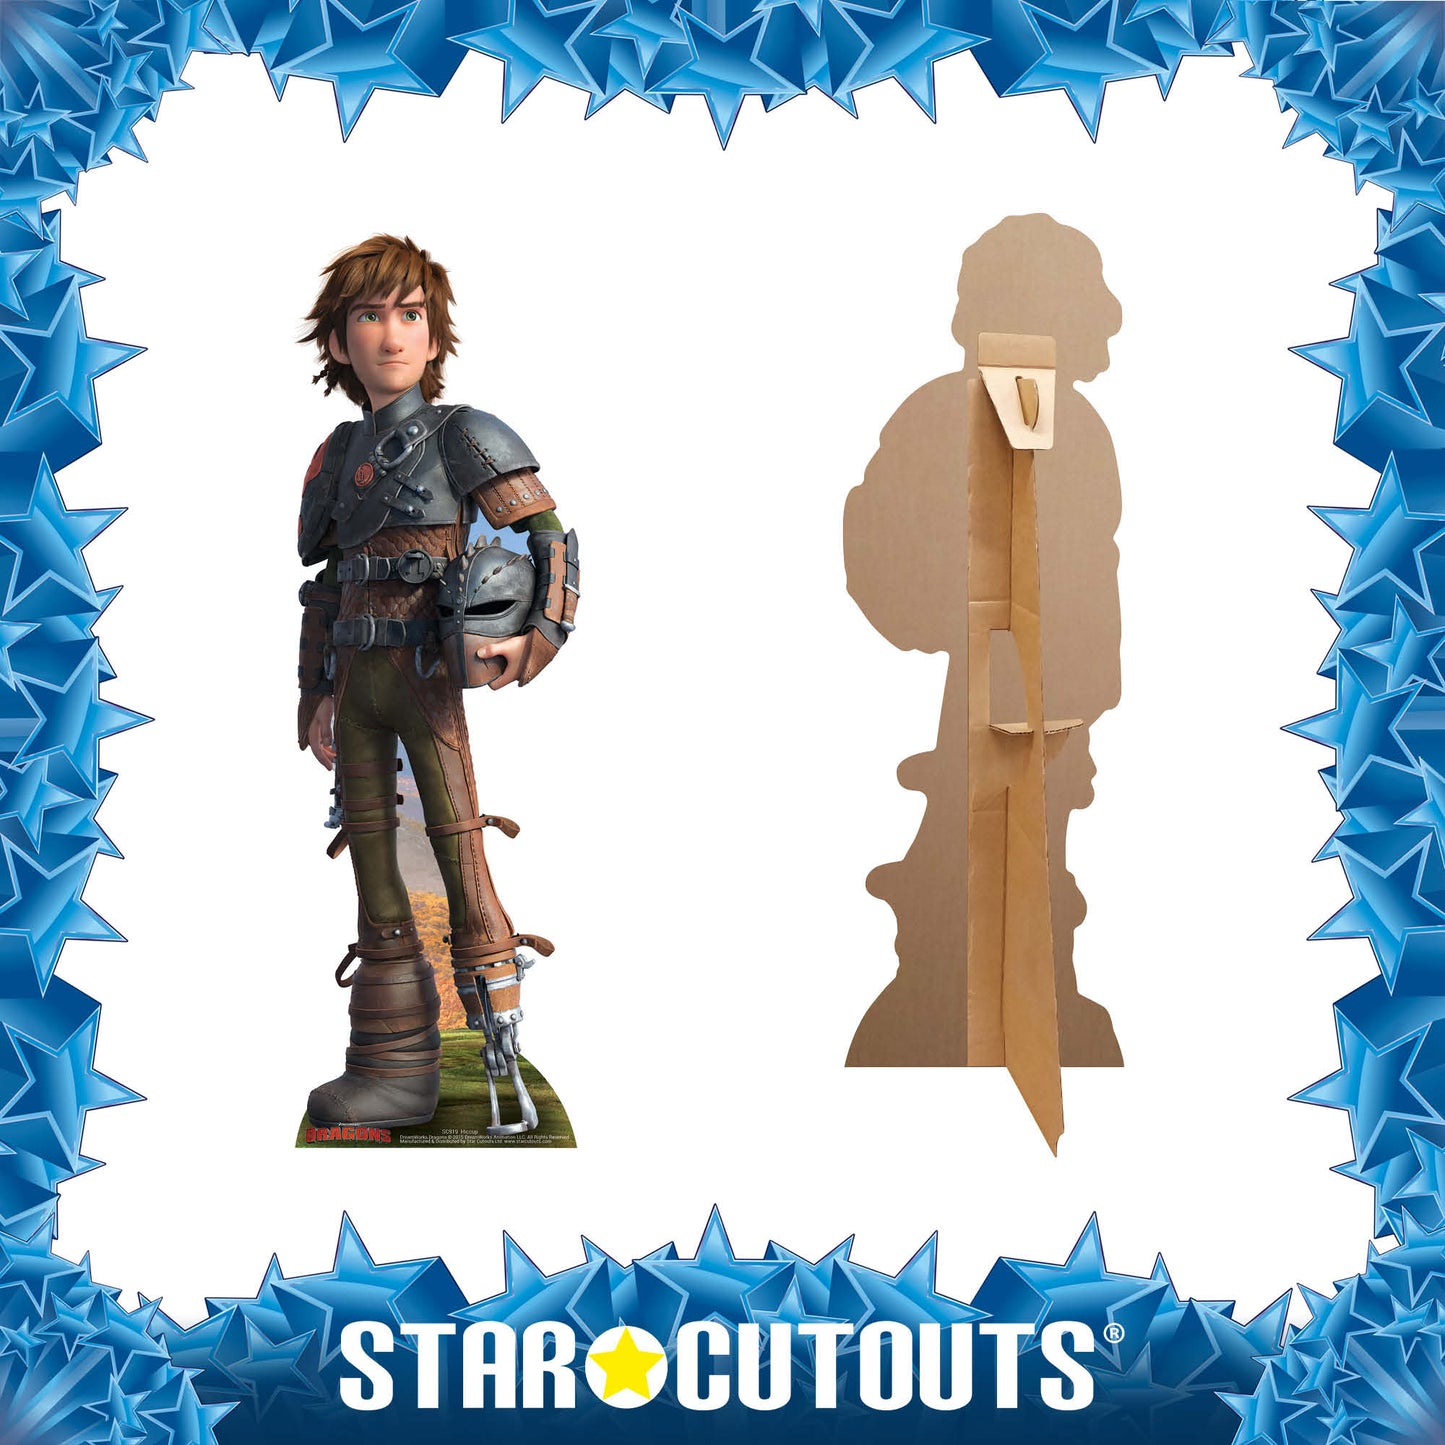 Hiccup Small Cardboard Cutout